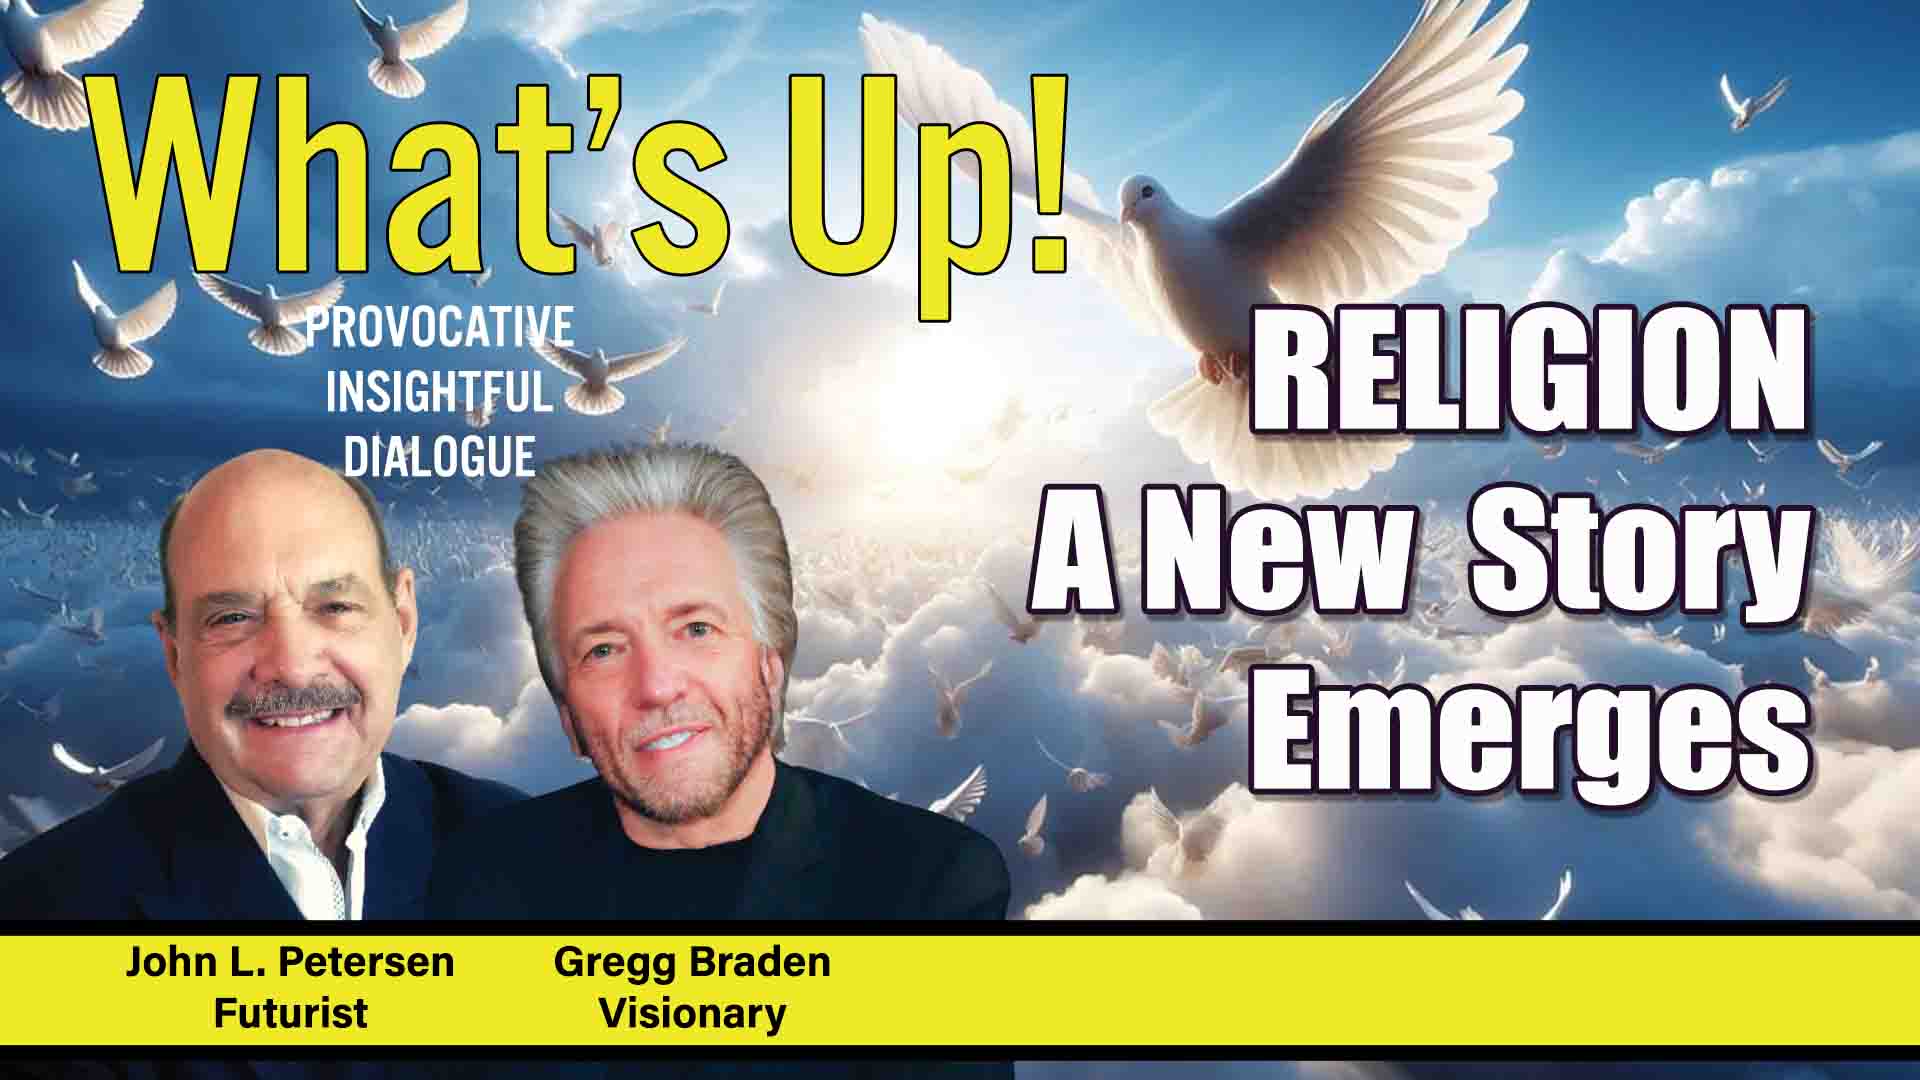 What's Up Religion - A New Story Emerges